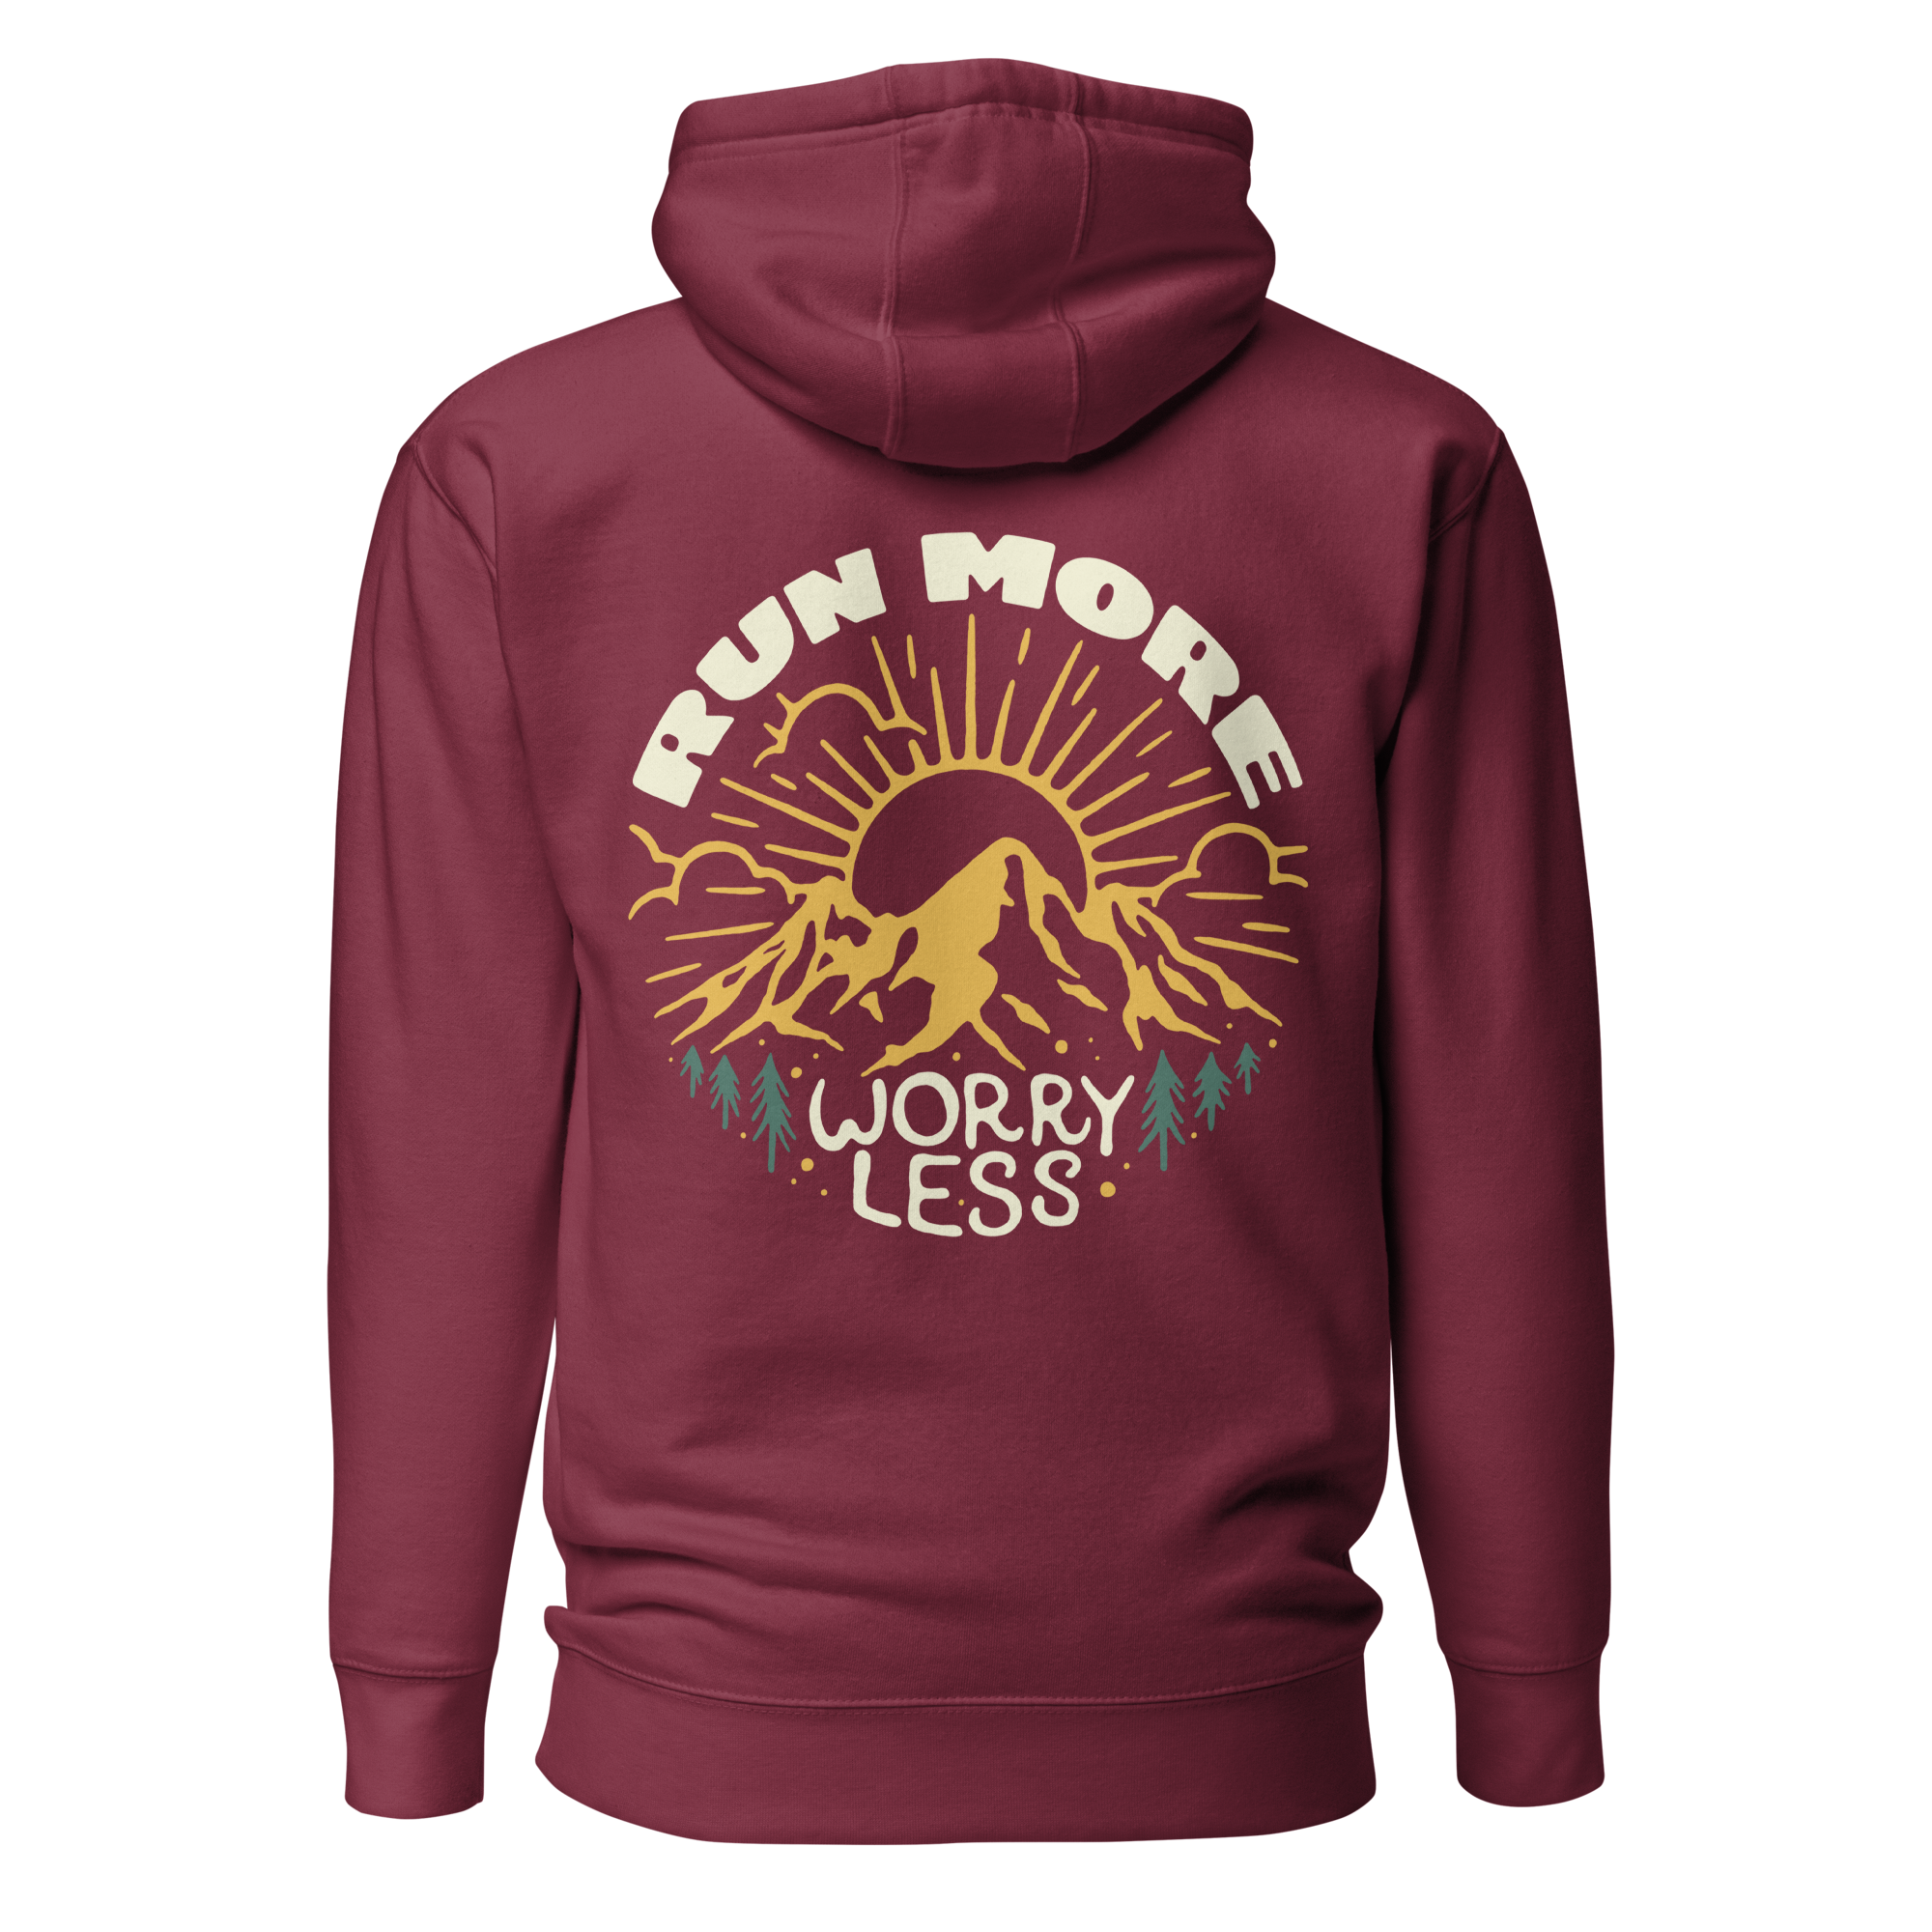 Run More Worry Less Graphic Women's Fitted Hoodie